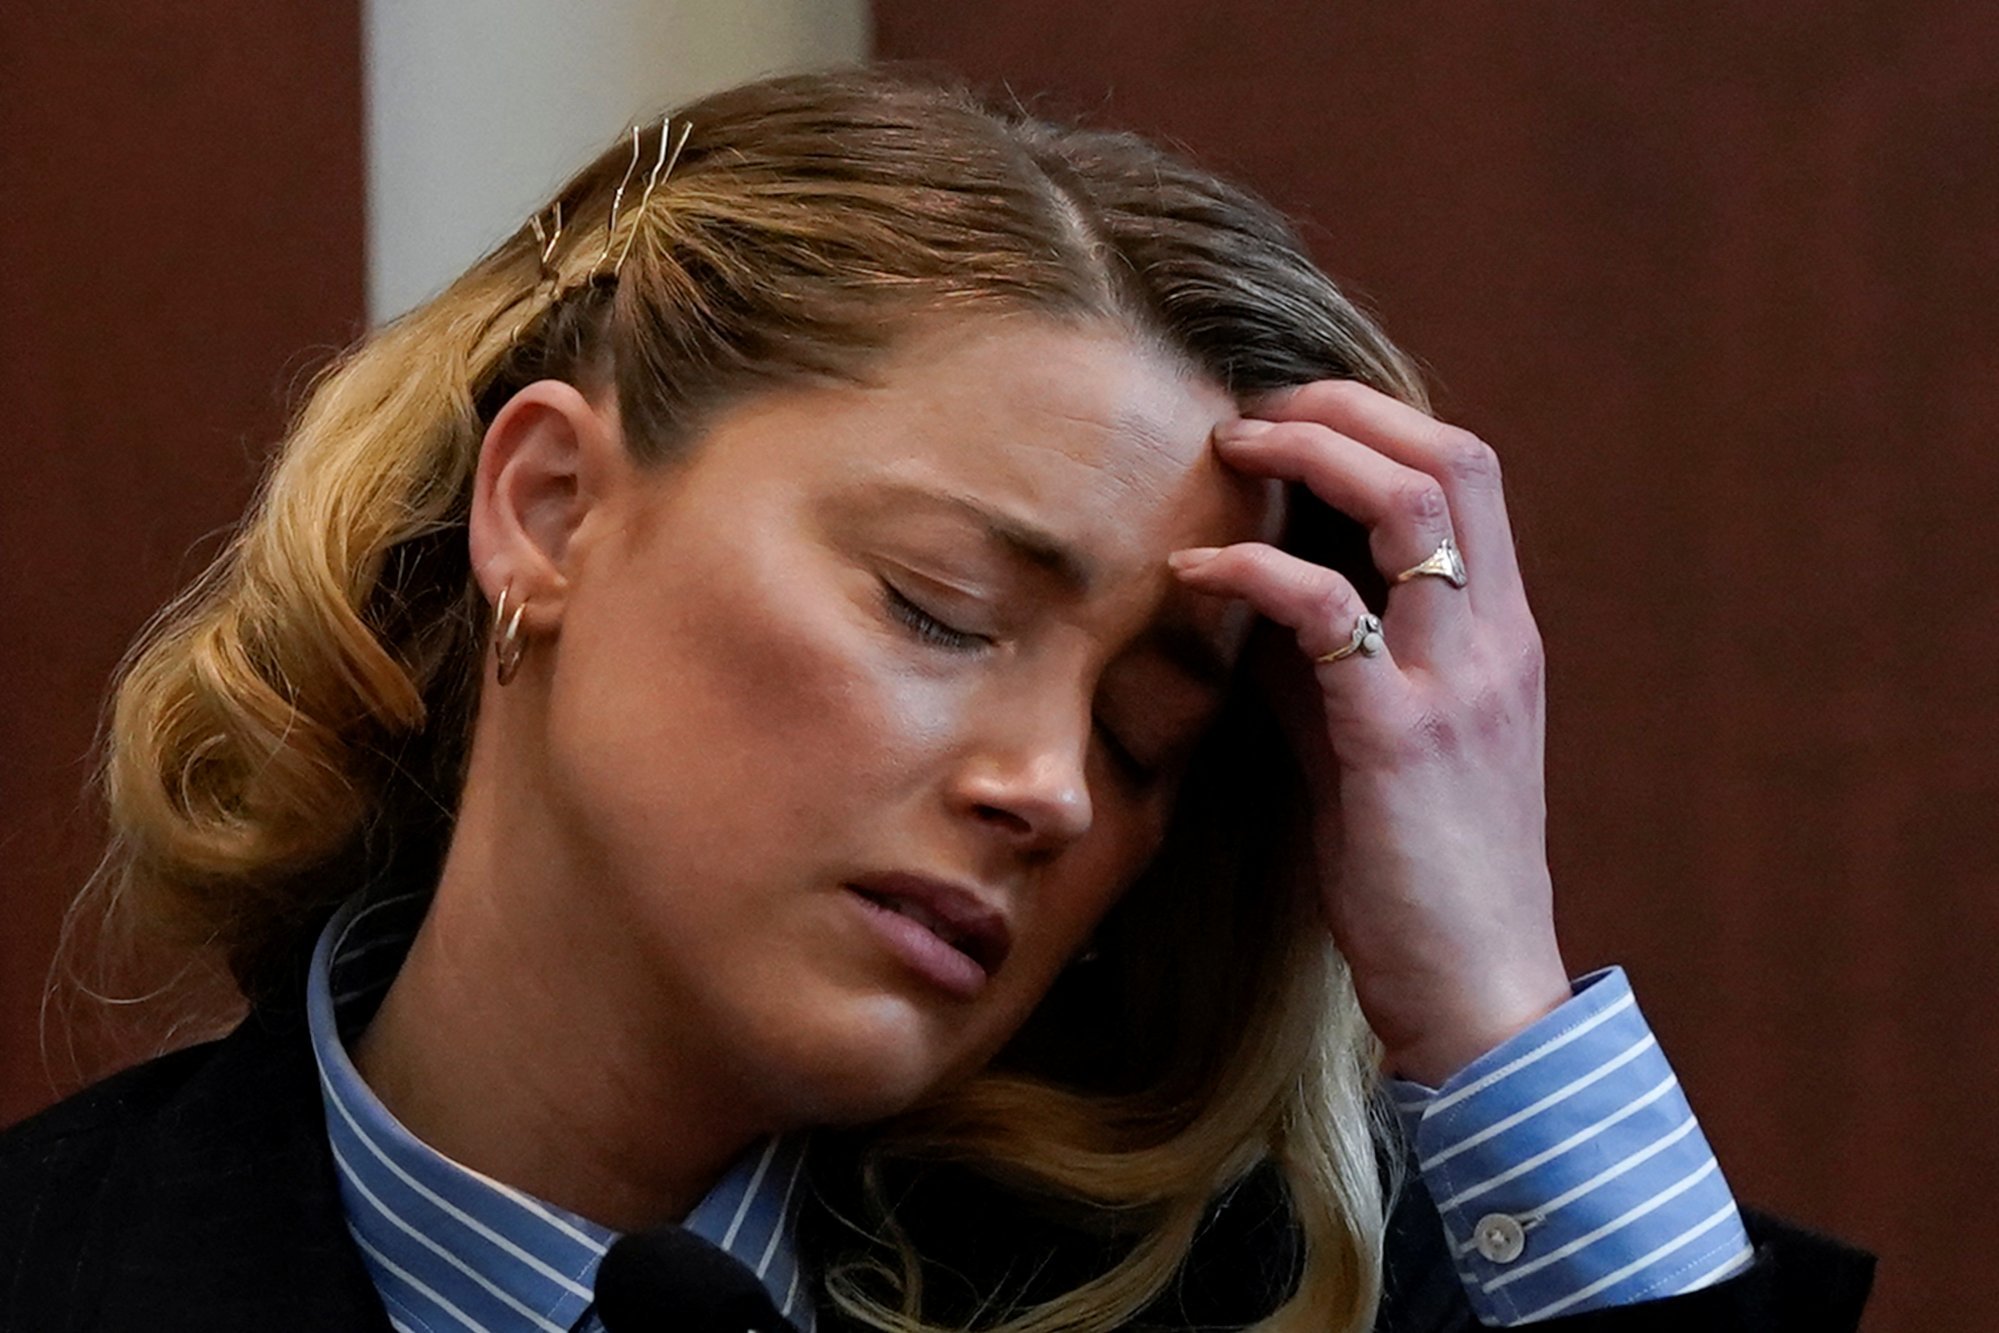 Actress Amber Heard testifies at Fairfax County Circuit Court during a defamation case against her by ex-husband, actor Johnny Depp in Fairfax, Virginia, on May 4. Photo: Reuters